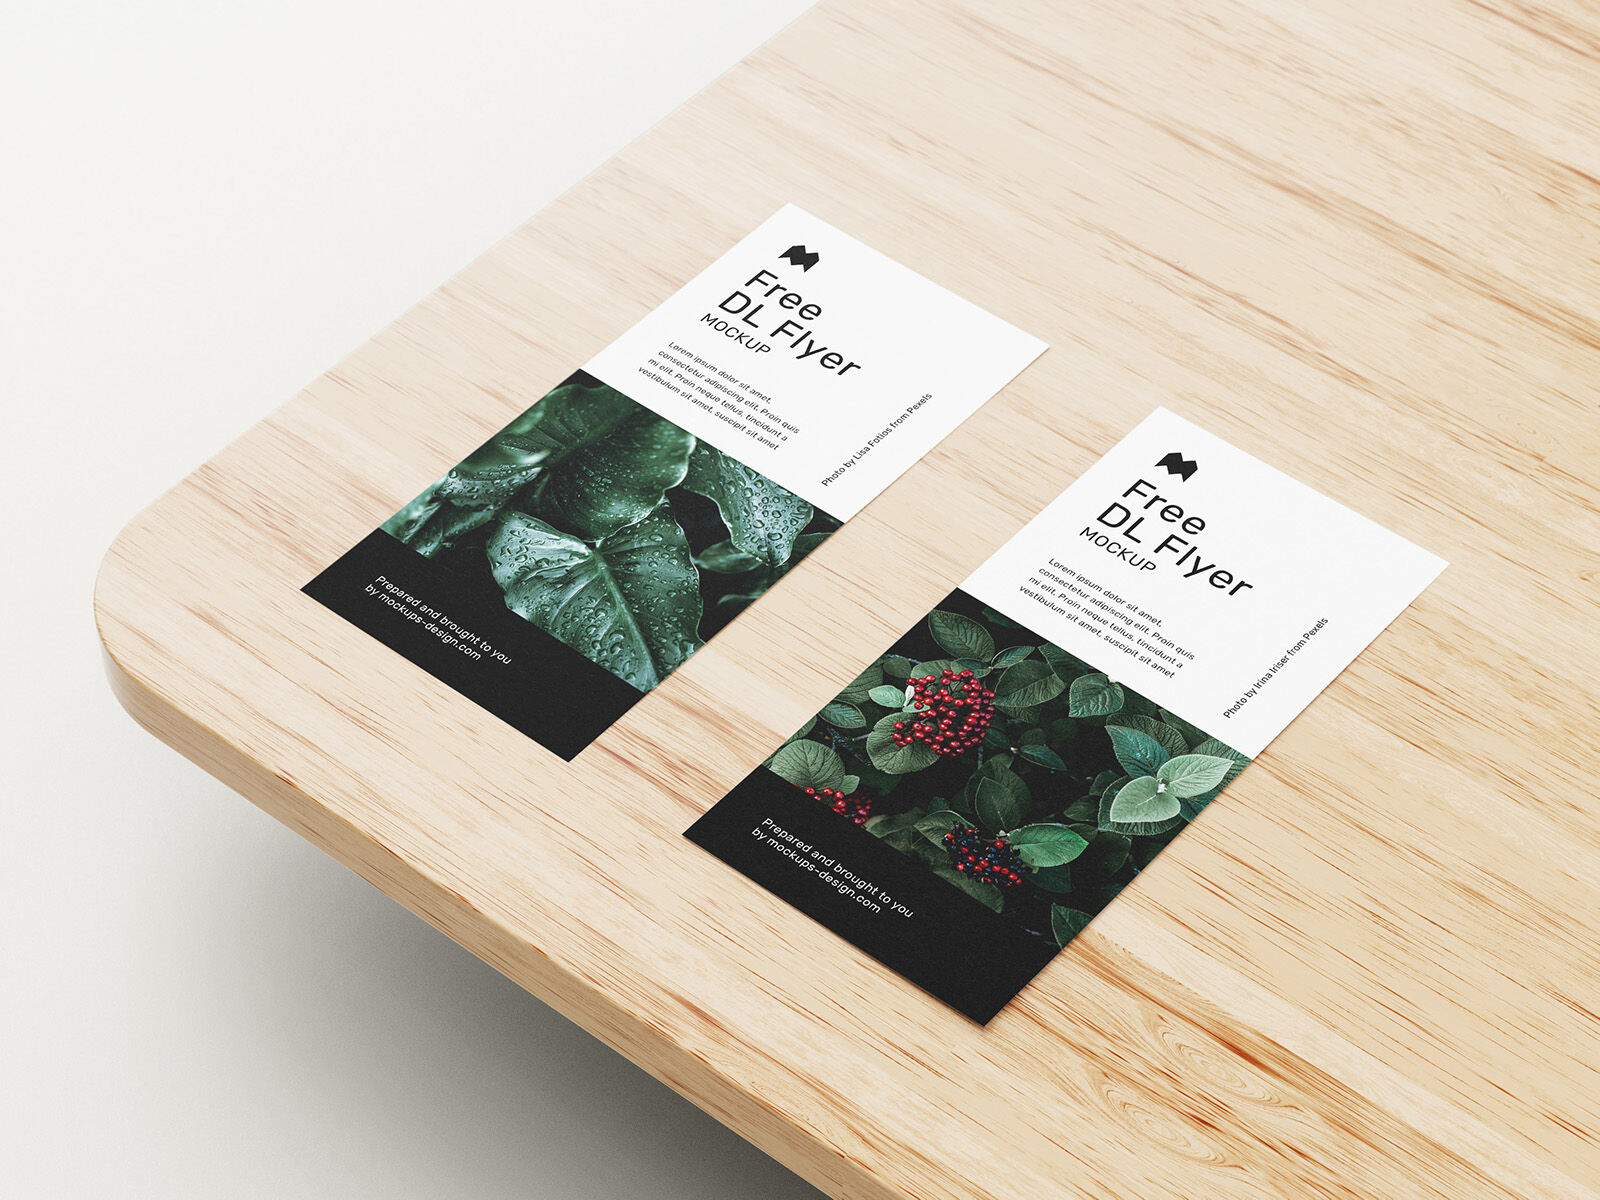 6 Mockups of DL Rack Cards on Wooden Table in Different Views and Positions FREE PSD